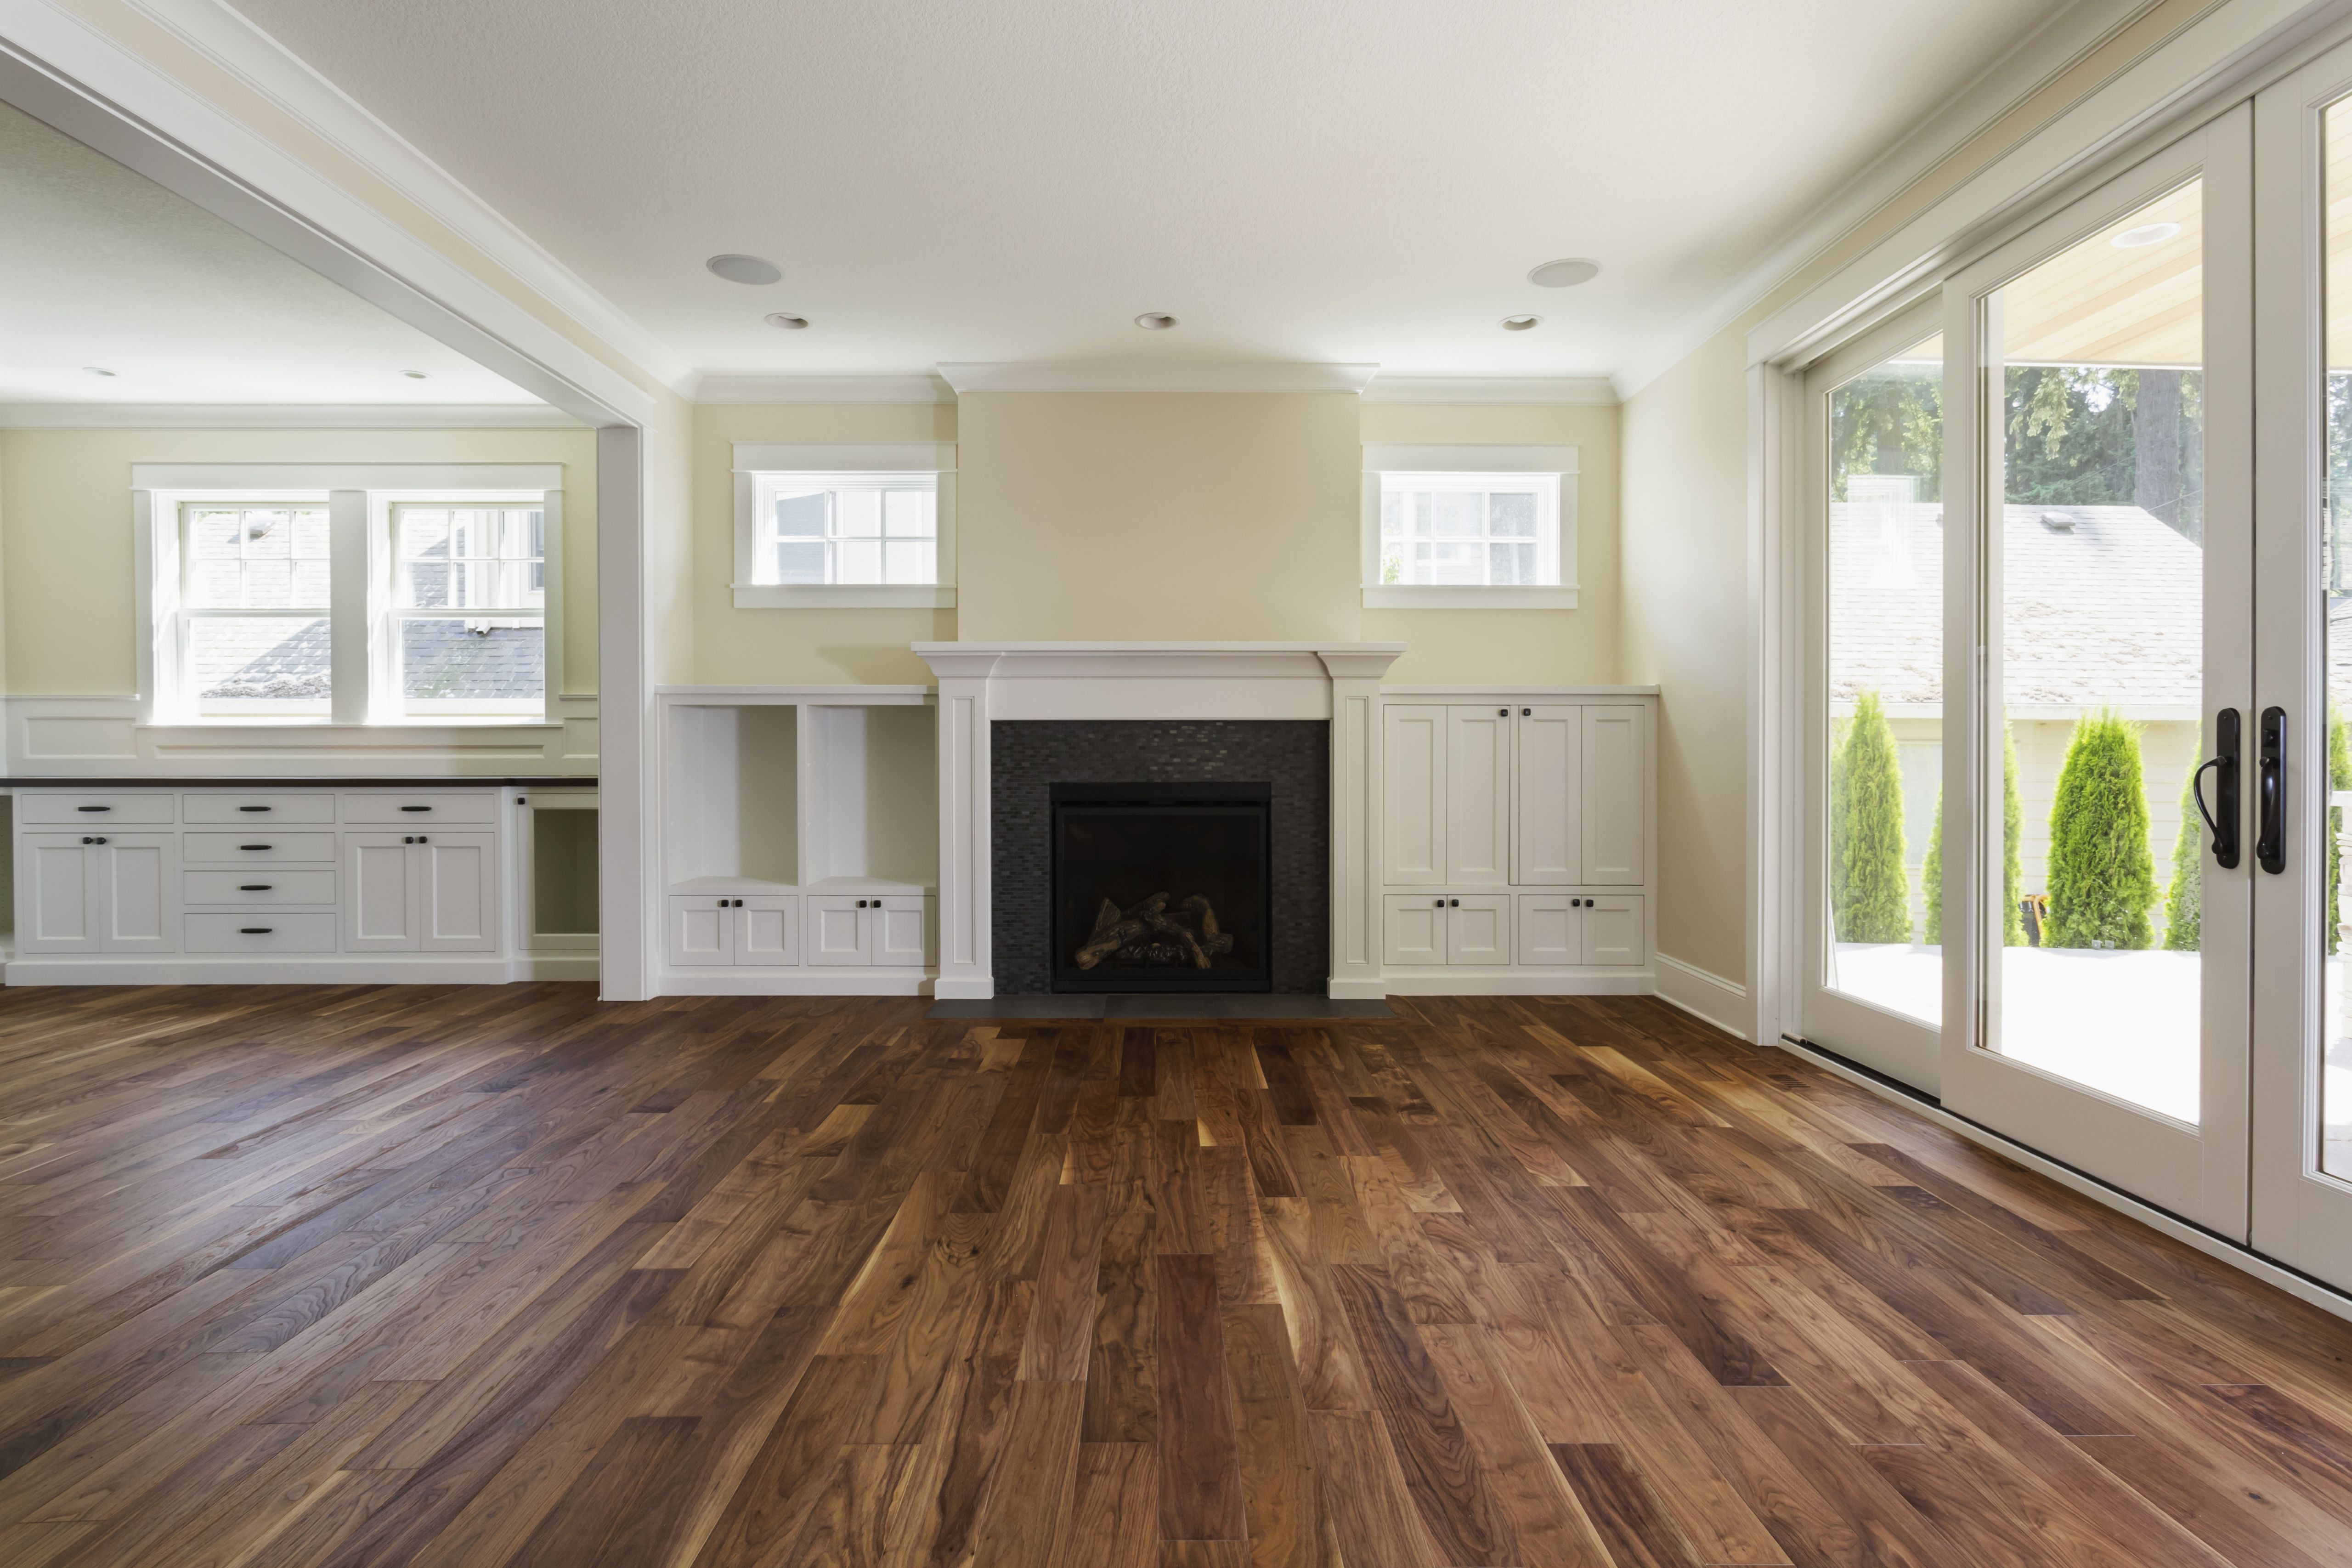 12 attractive Hardwood Flooring Discount Warehouse 2024 free download hardwood flooring discount warehouse of the pros and cons of prefinished hardwood flooring in fireplace and built in shelves in living room 482143011 57bef8e33df78cc16e035397